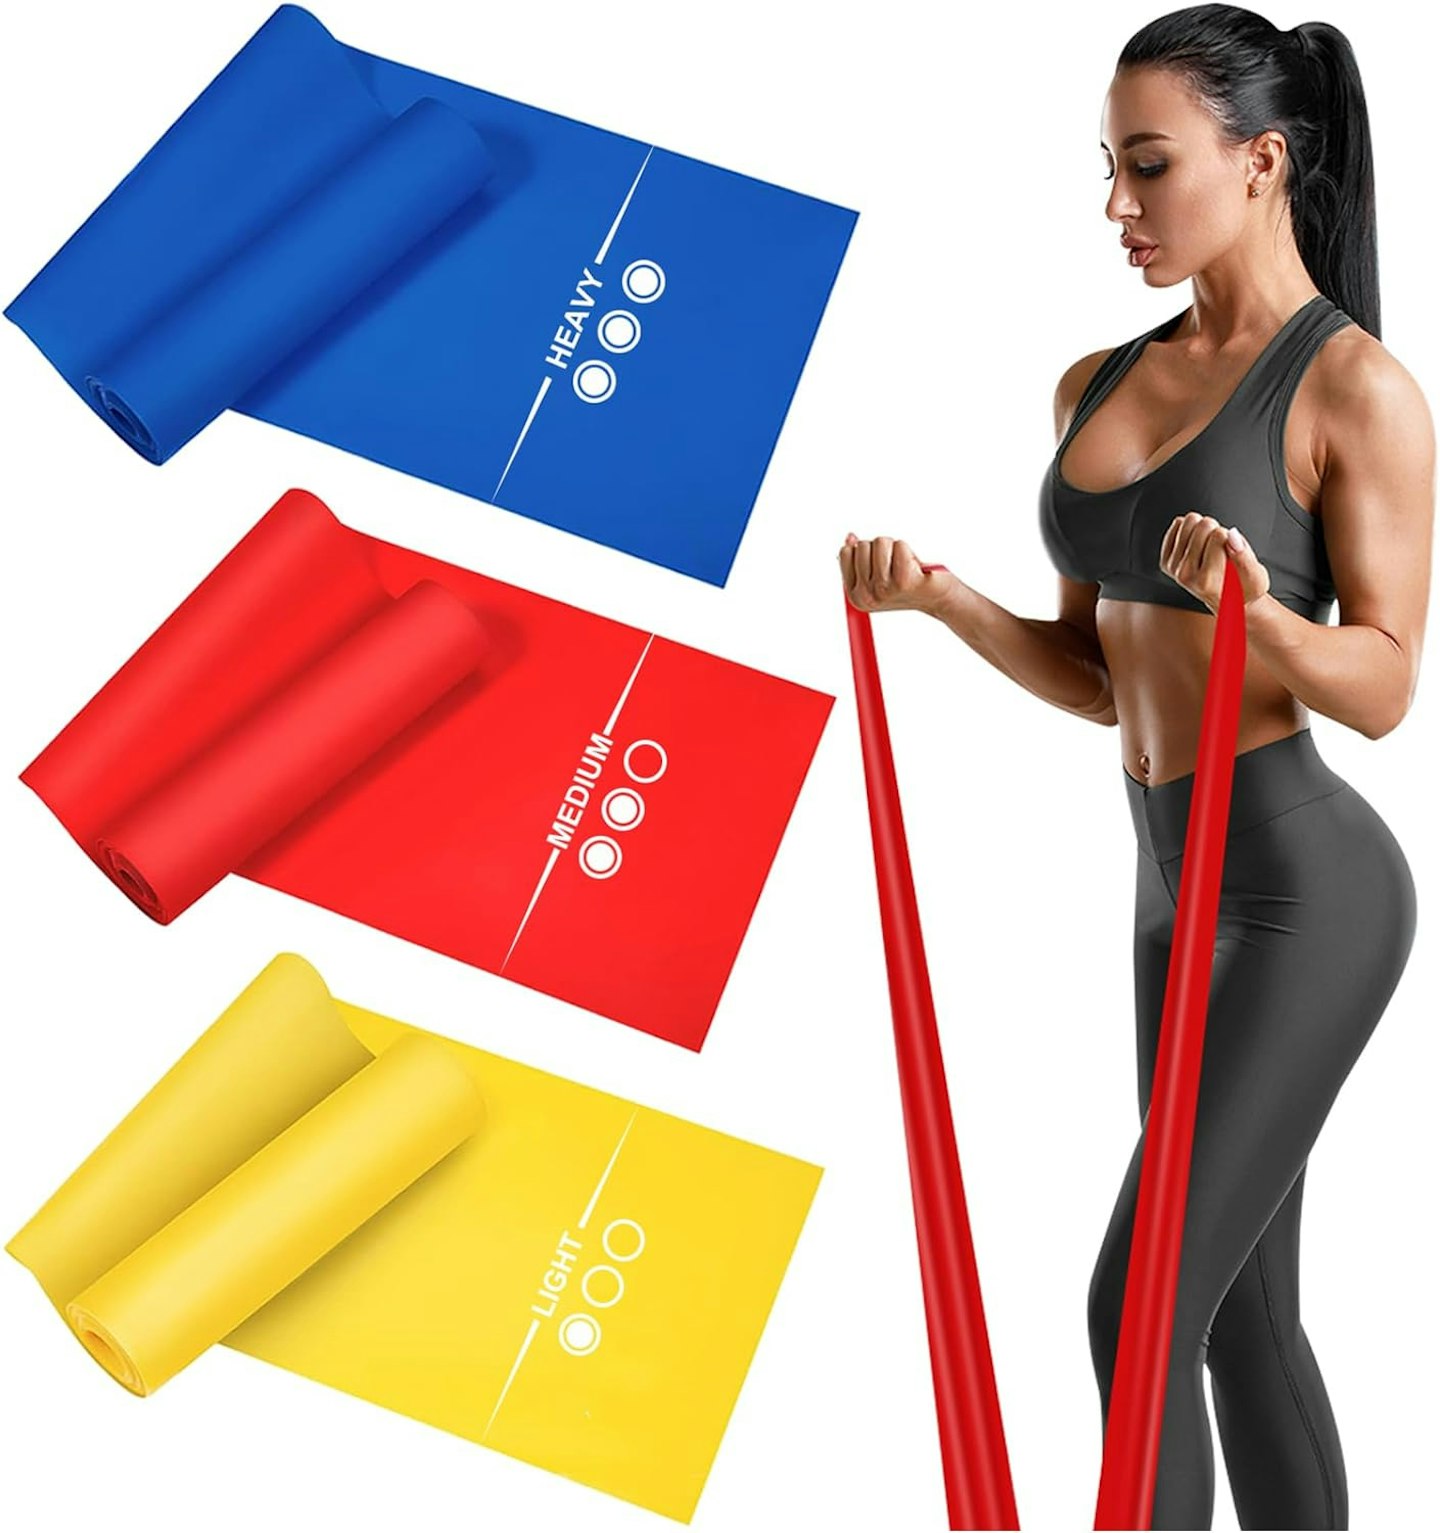 three resistance bands in red, blue and yellow